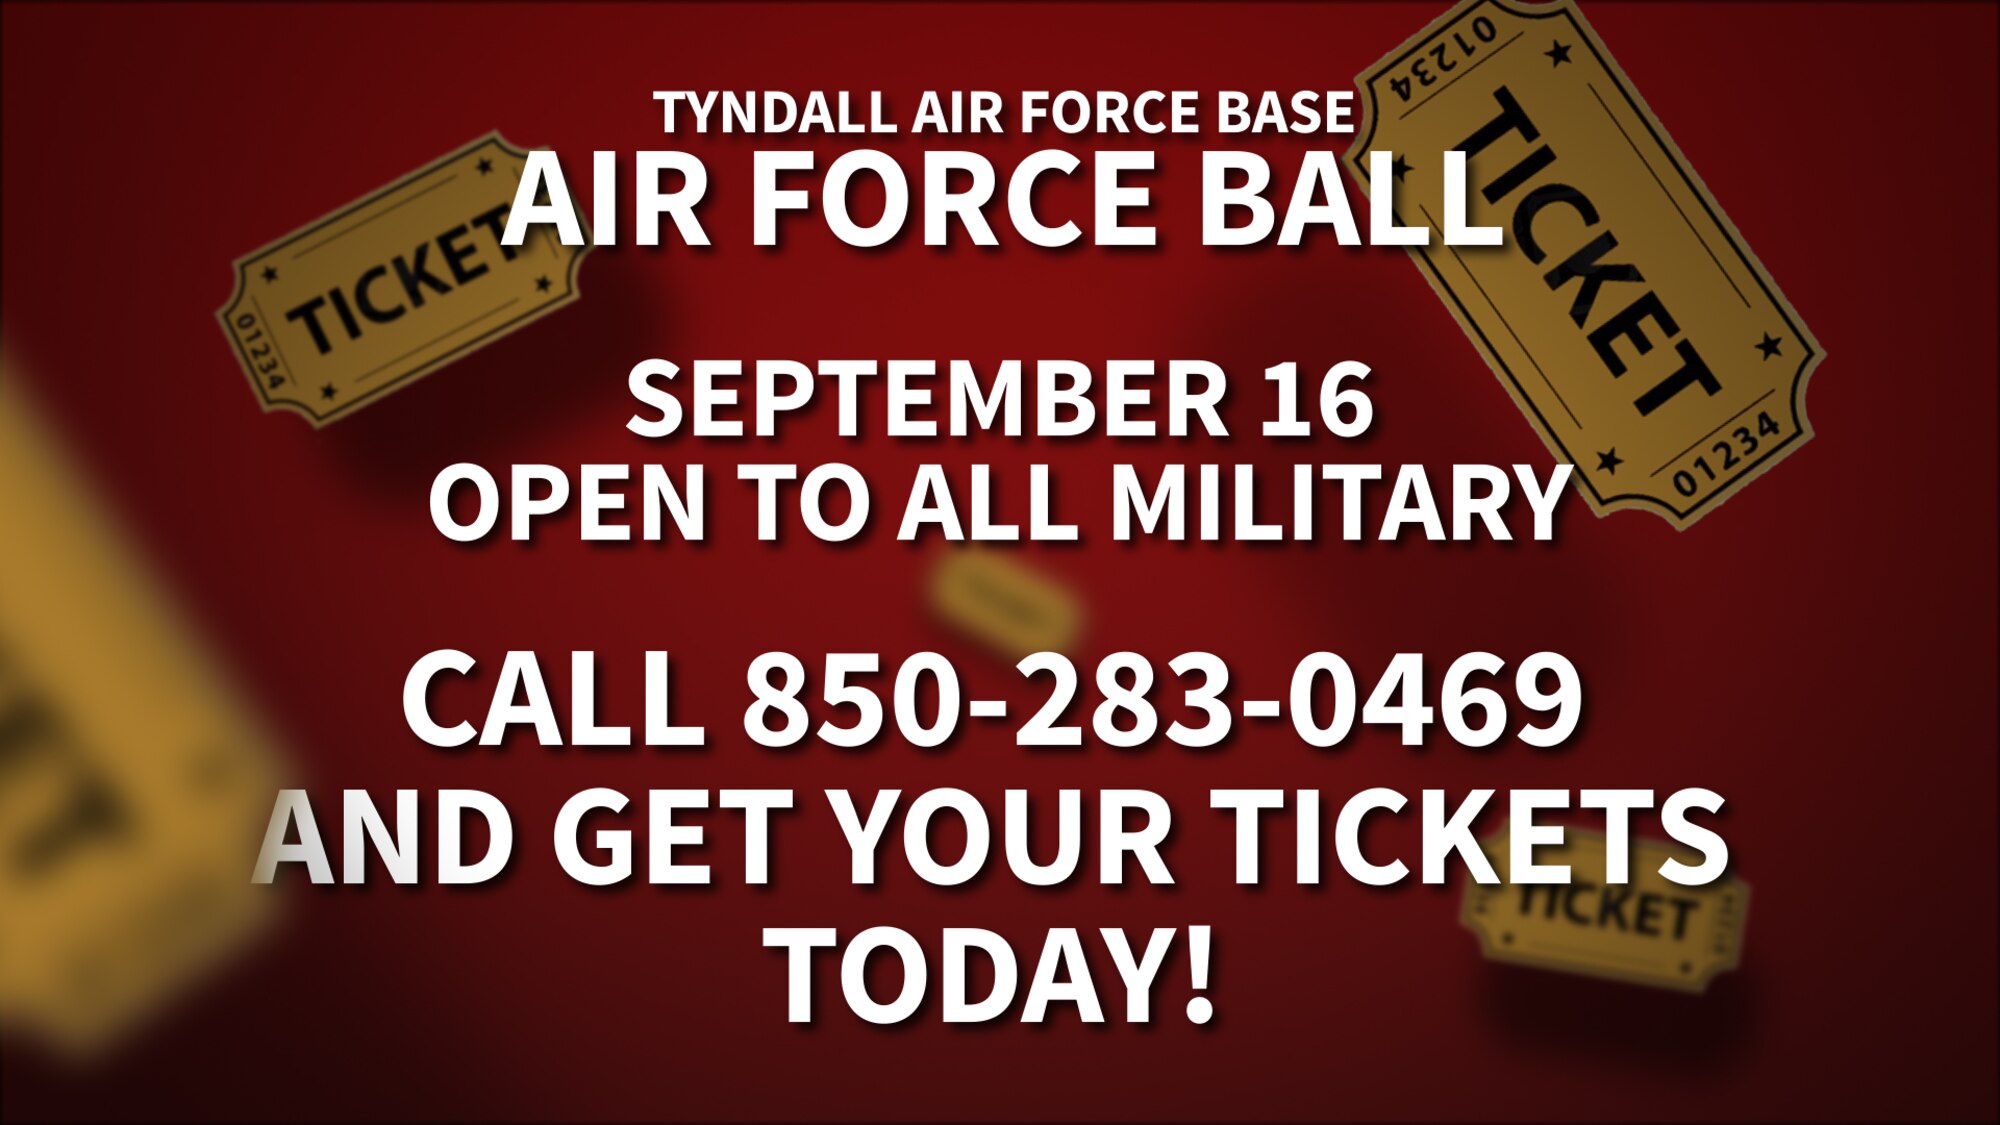 Team Tyndall, Col. Michael Hernandez and his wife, Liz Hernandez, request the pleasure of your company at the Air Force Ball Sept. 16, 2017.